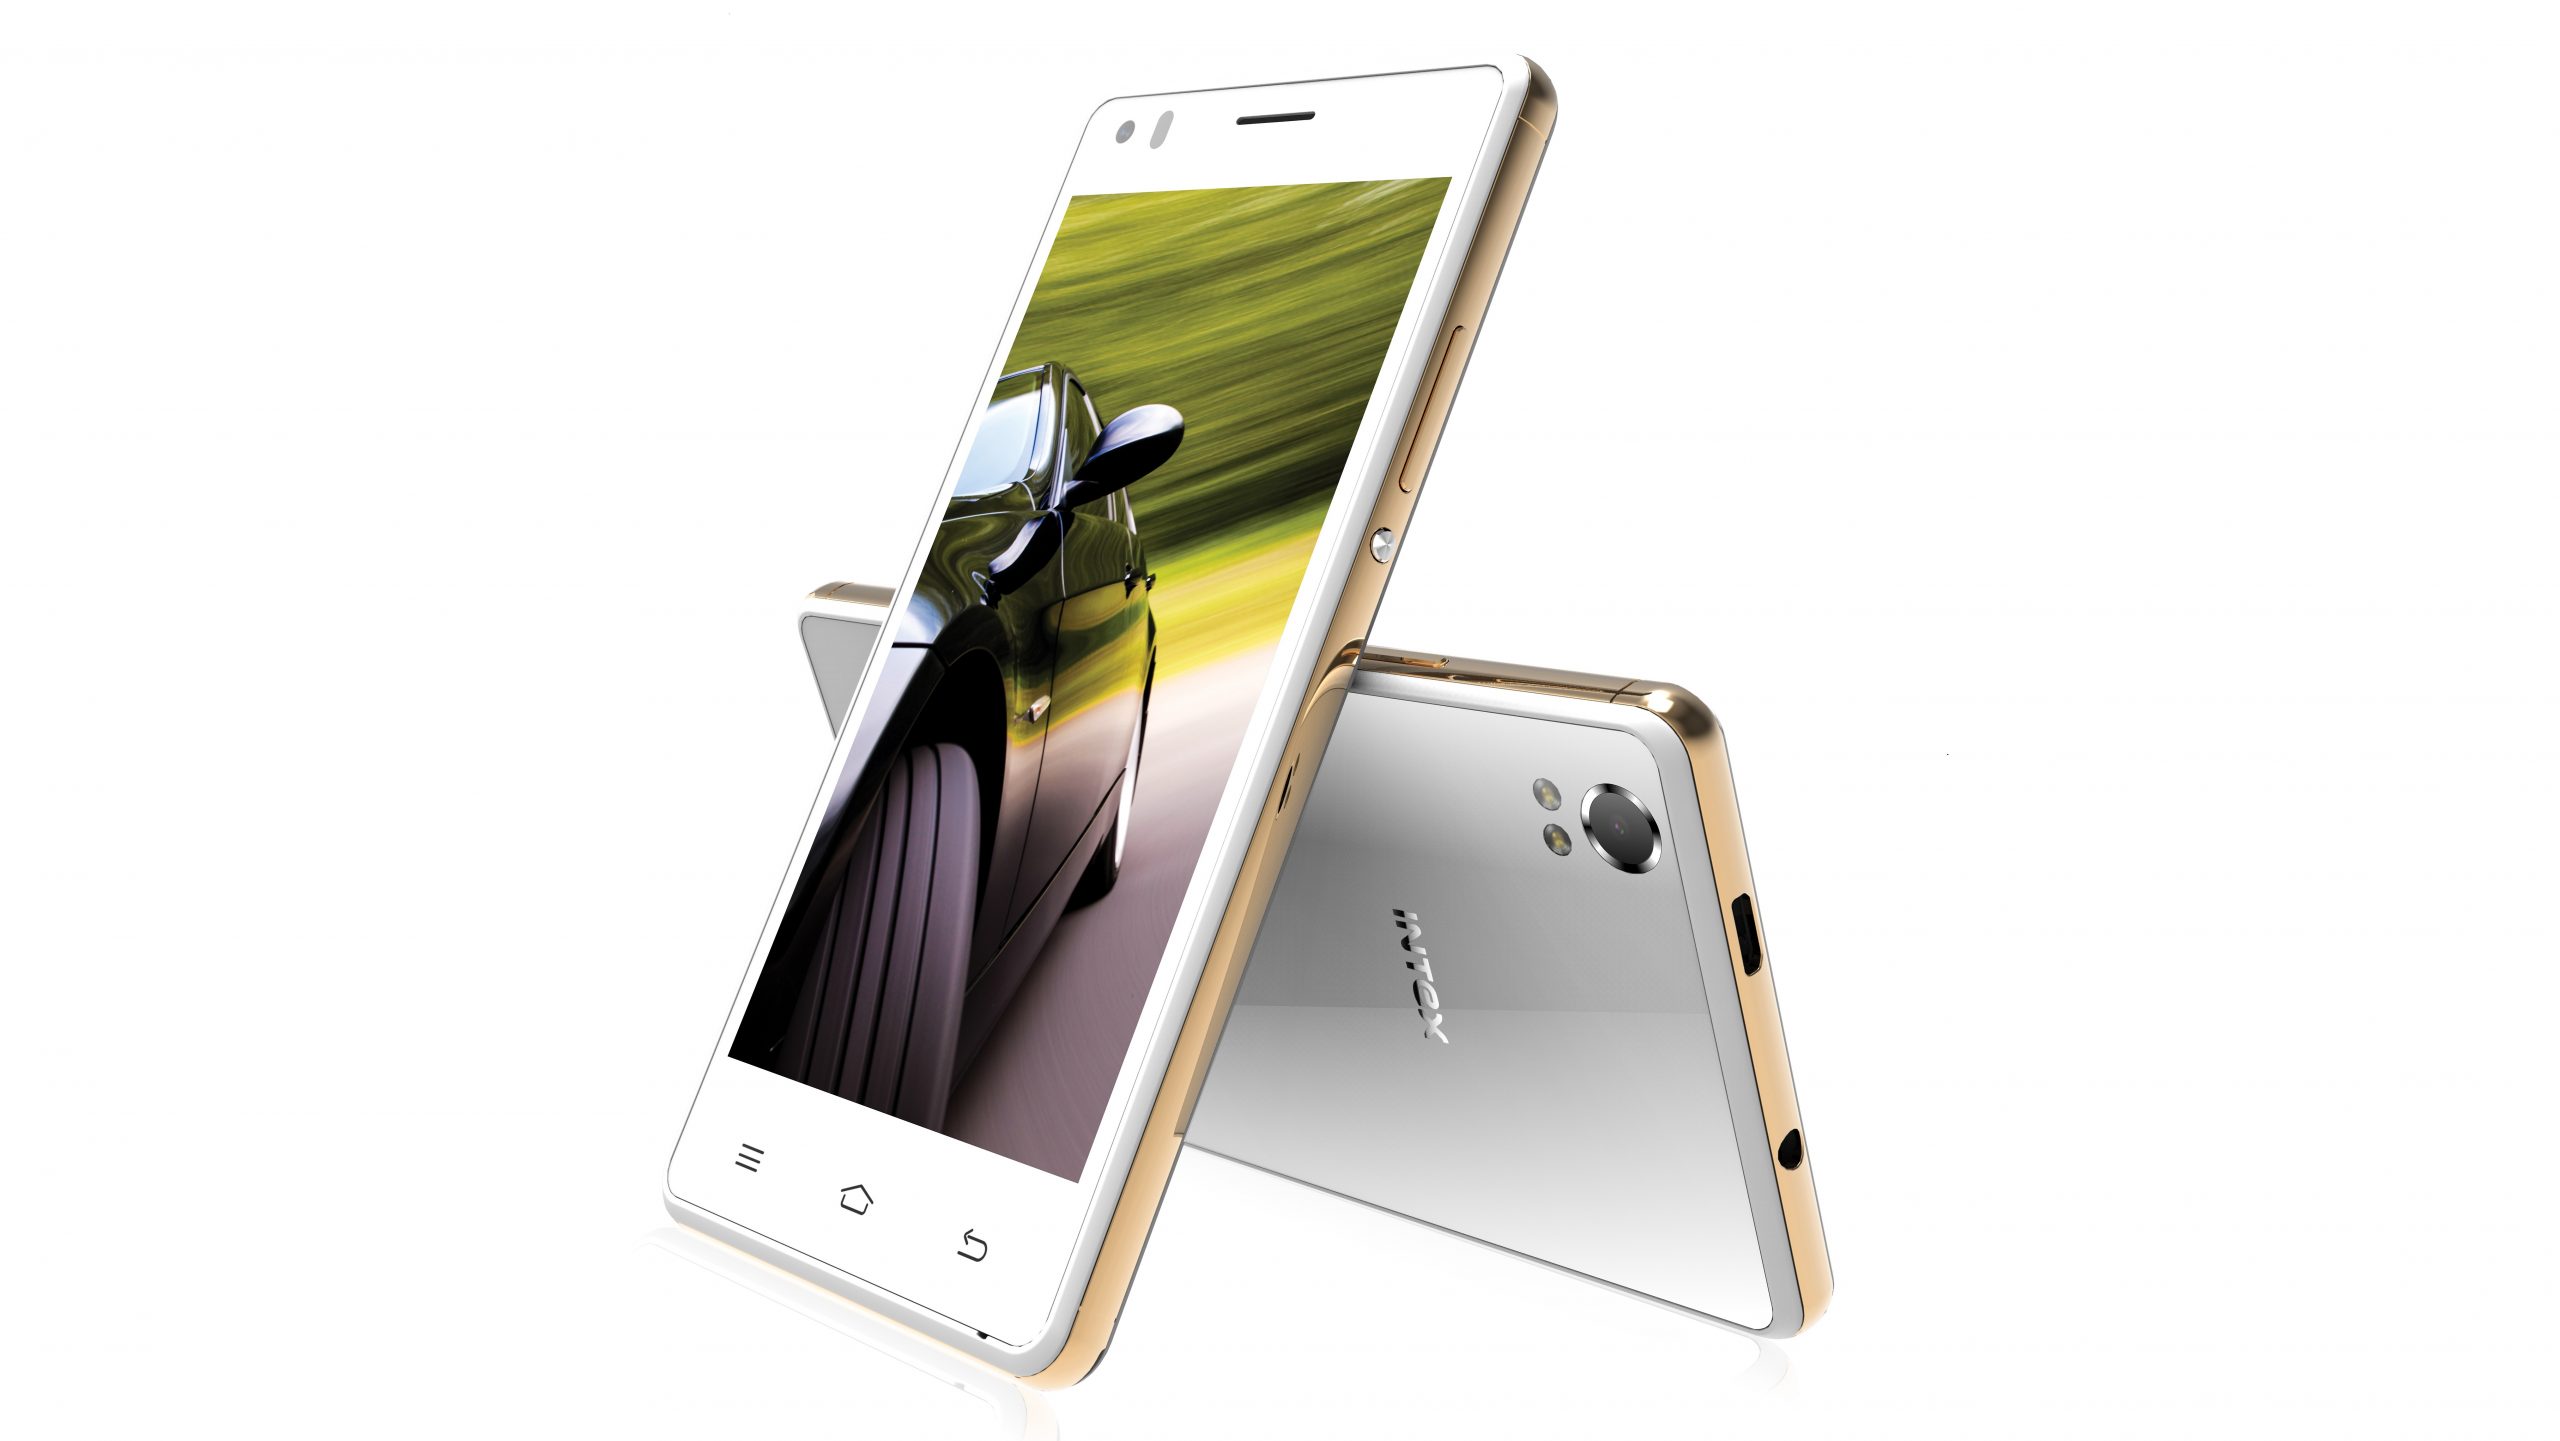 The smartphone features an octa-core processor, 2GB RAM and 16GB of storage